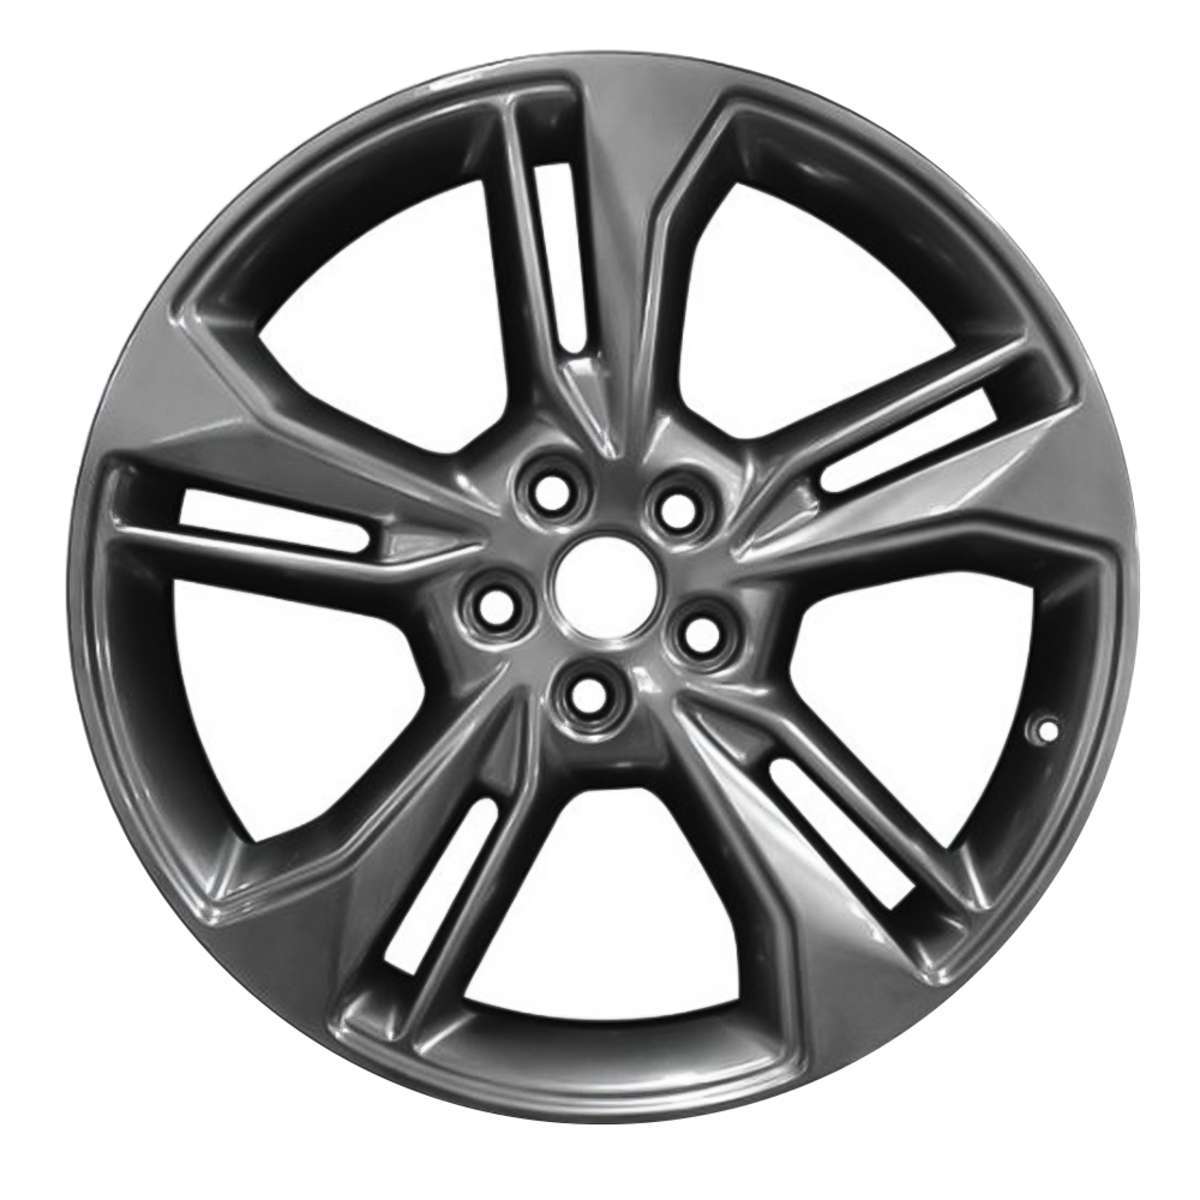 2017 Ford Fusion New 19" Replacement Wheel Rim RW10123H